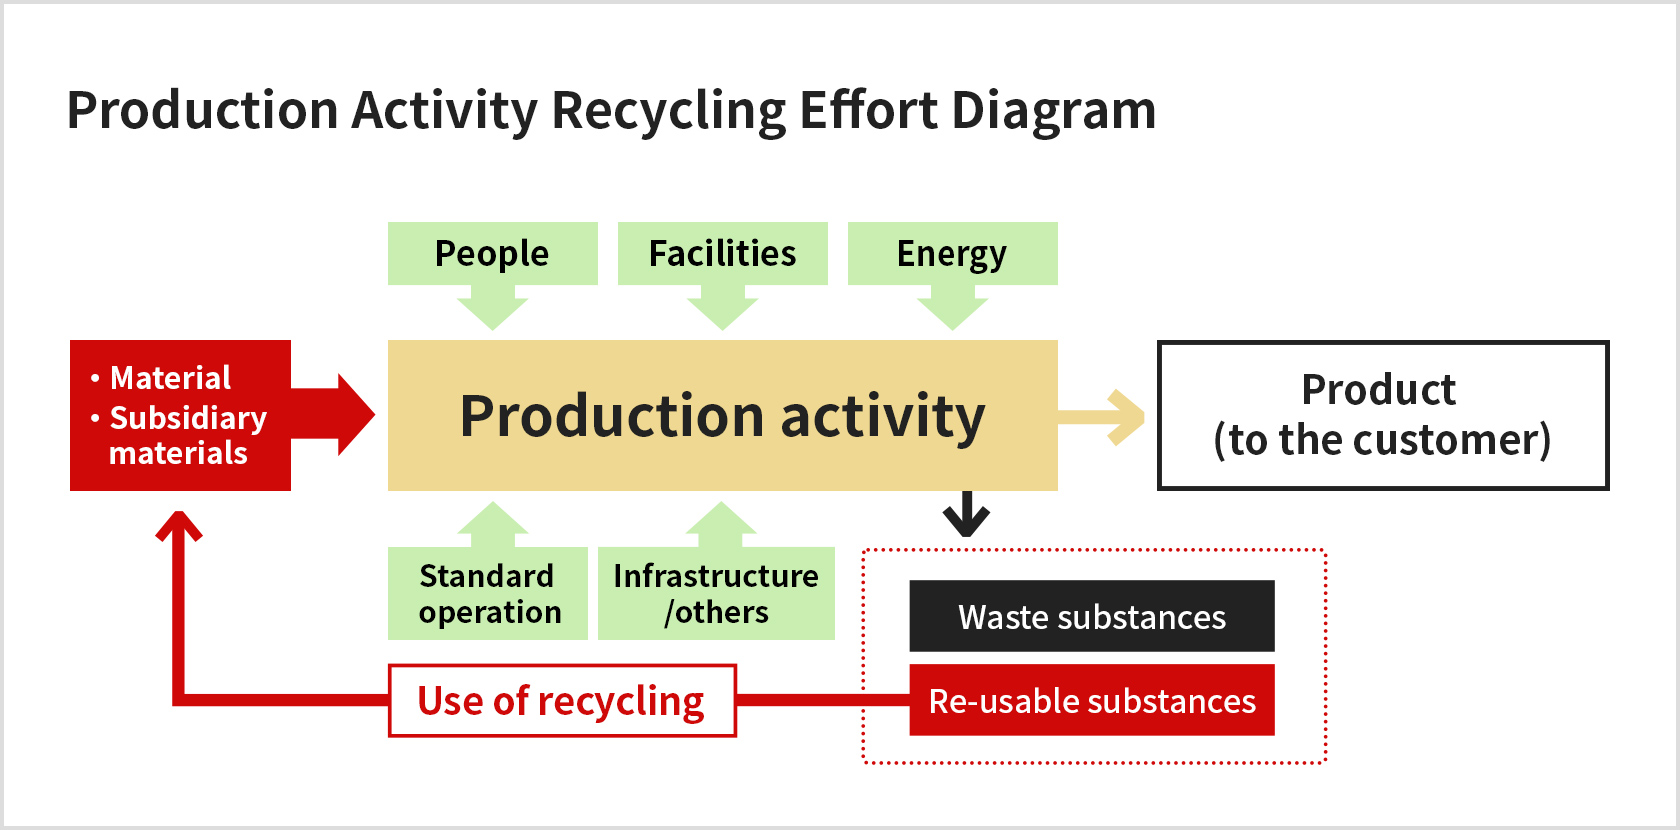 Production Activity Recycling Effort Diagram